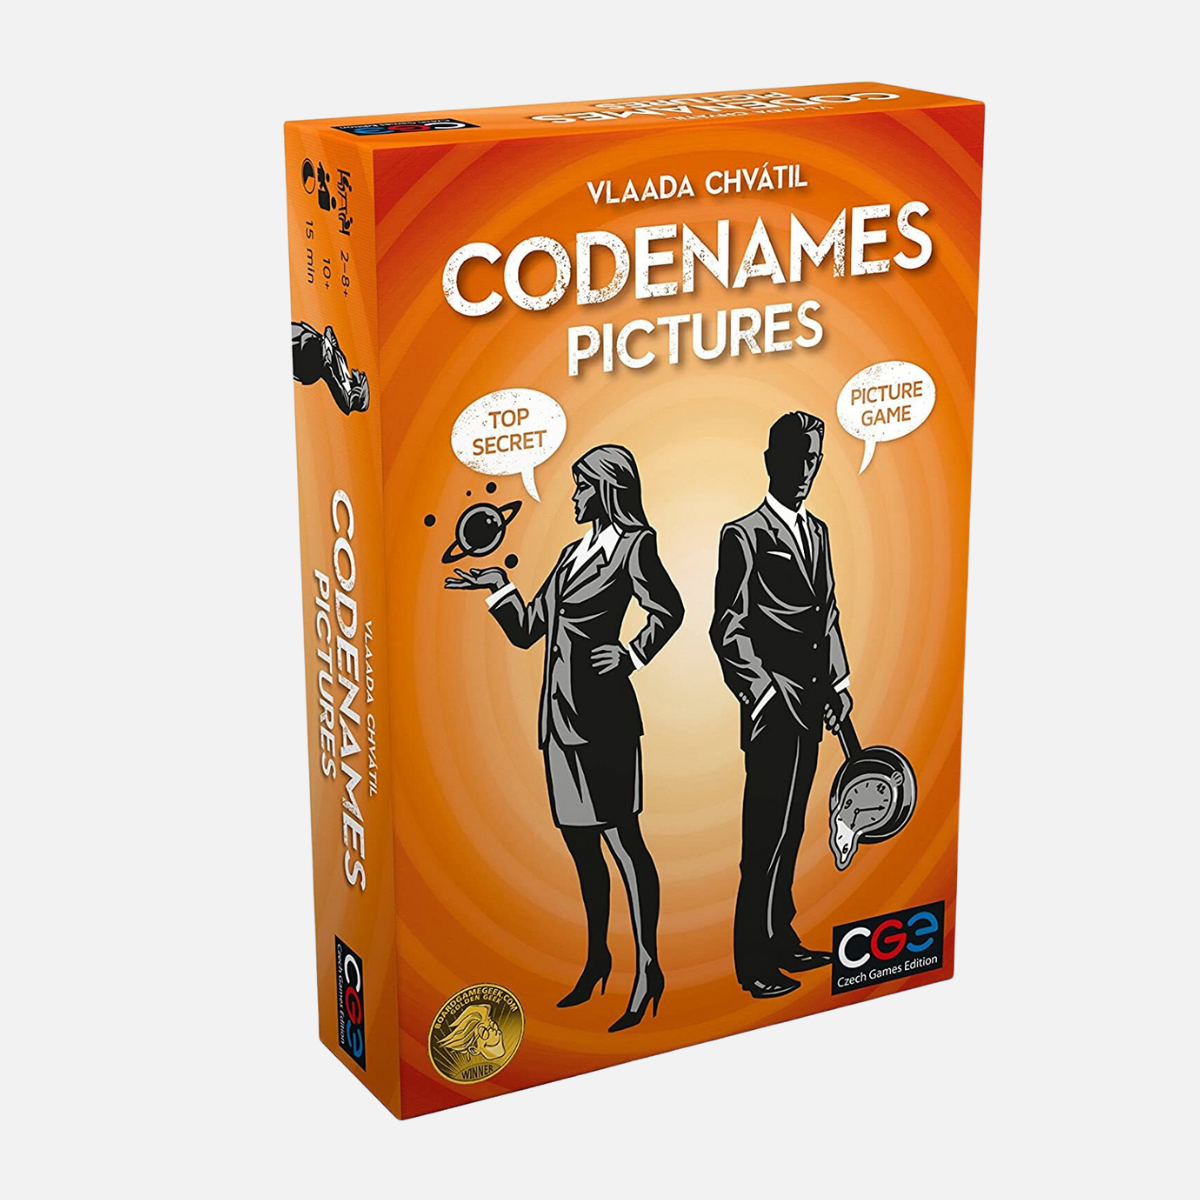 Codenames Pictures board games